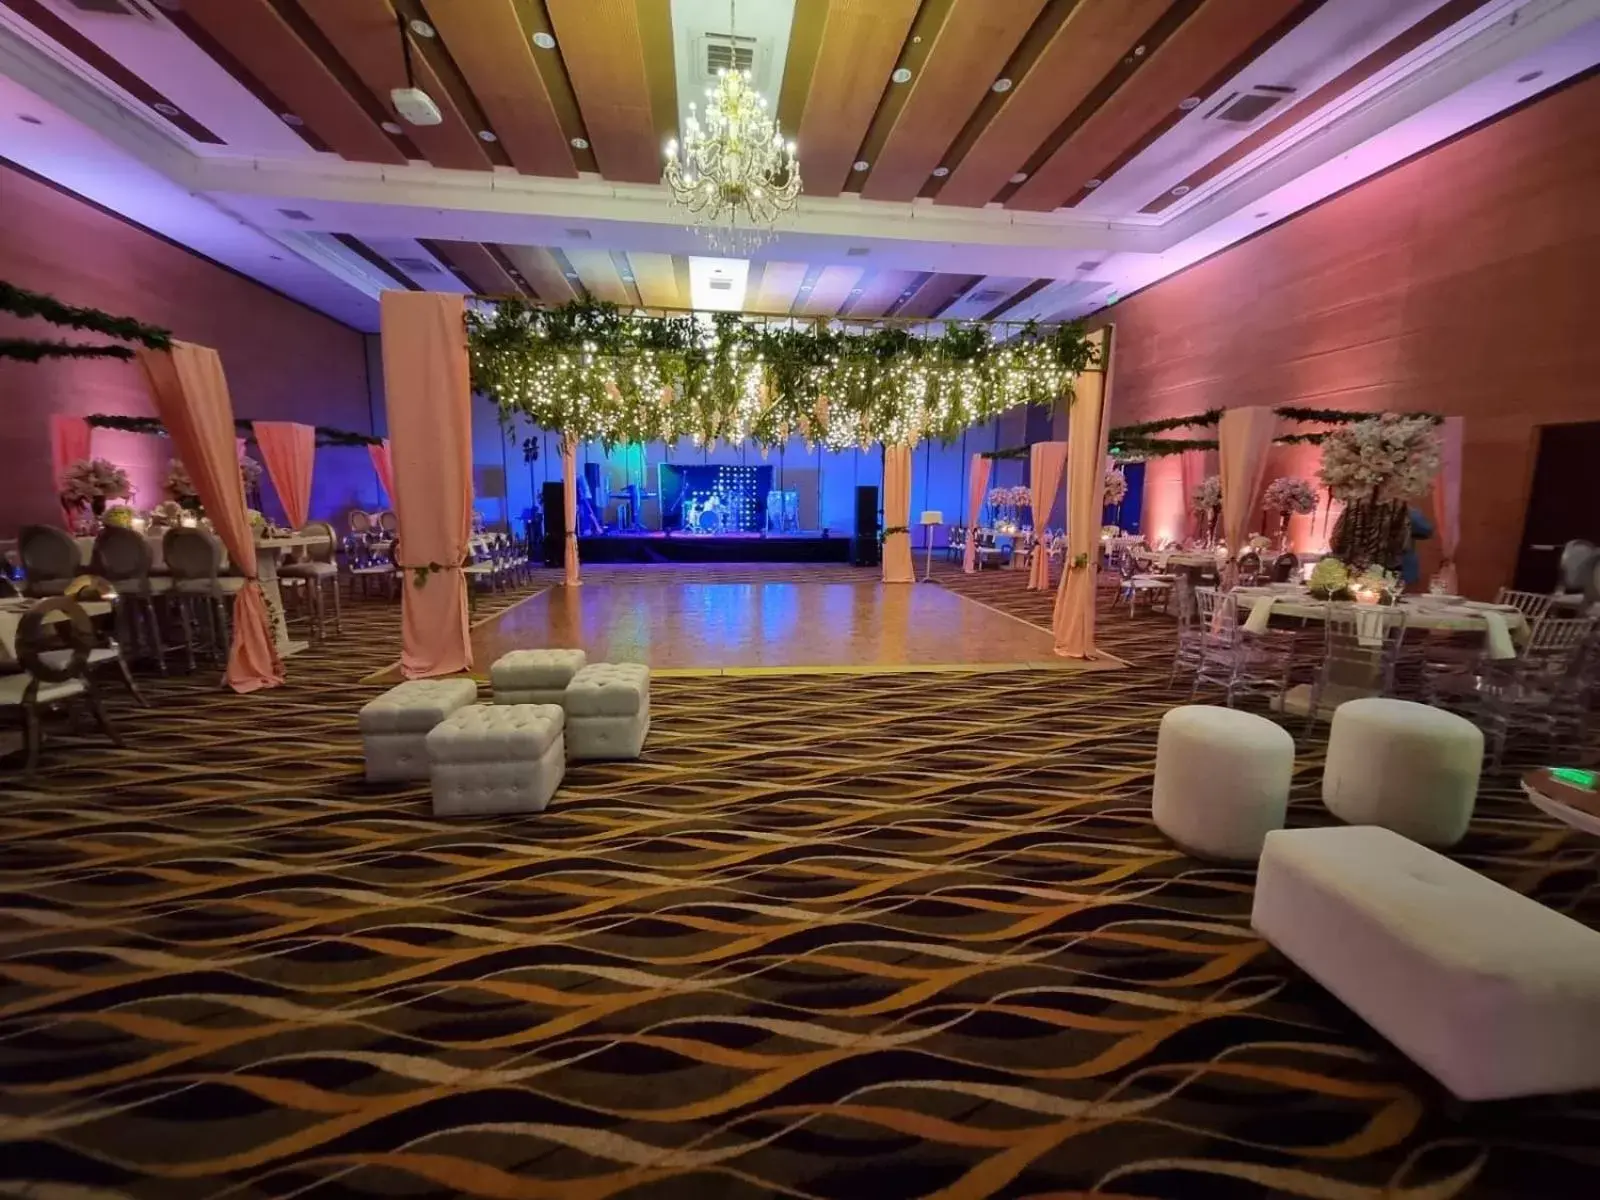 Banquet/Function facilities, Banquet Facilities in Wyndham Manta Sail Plaza Hotel and Convention Center